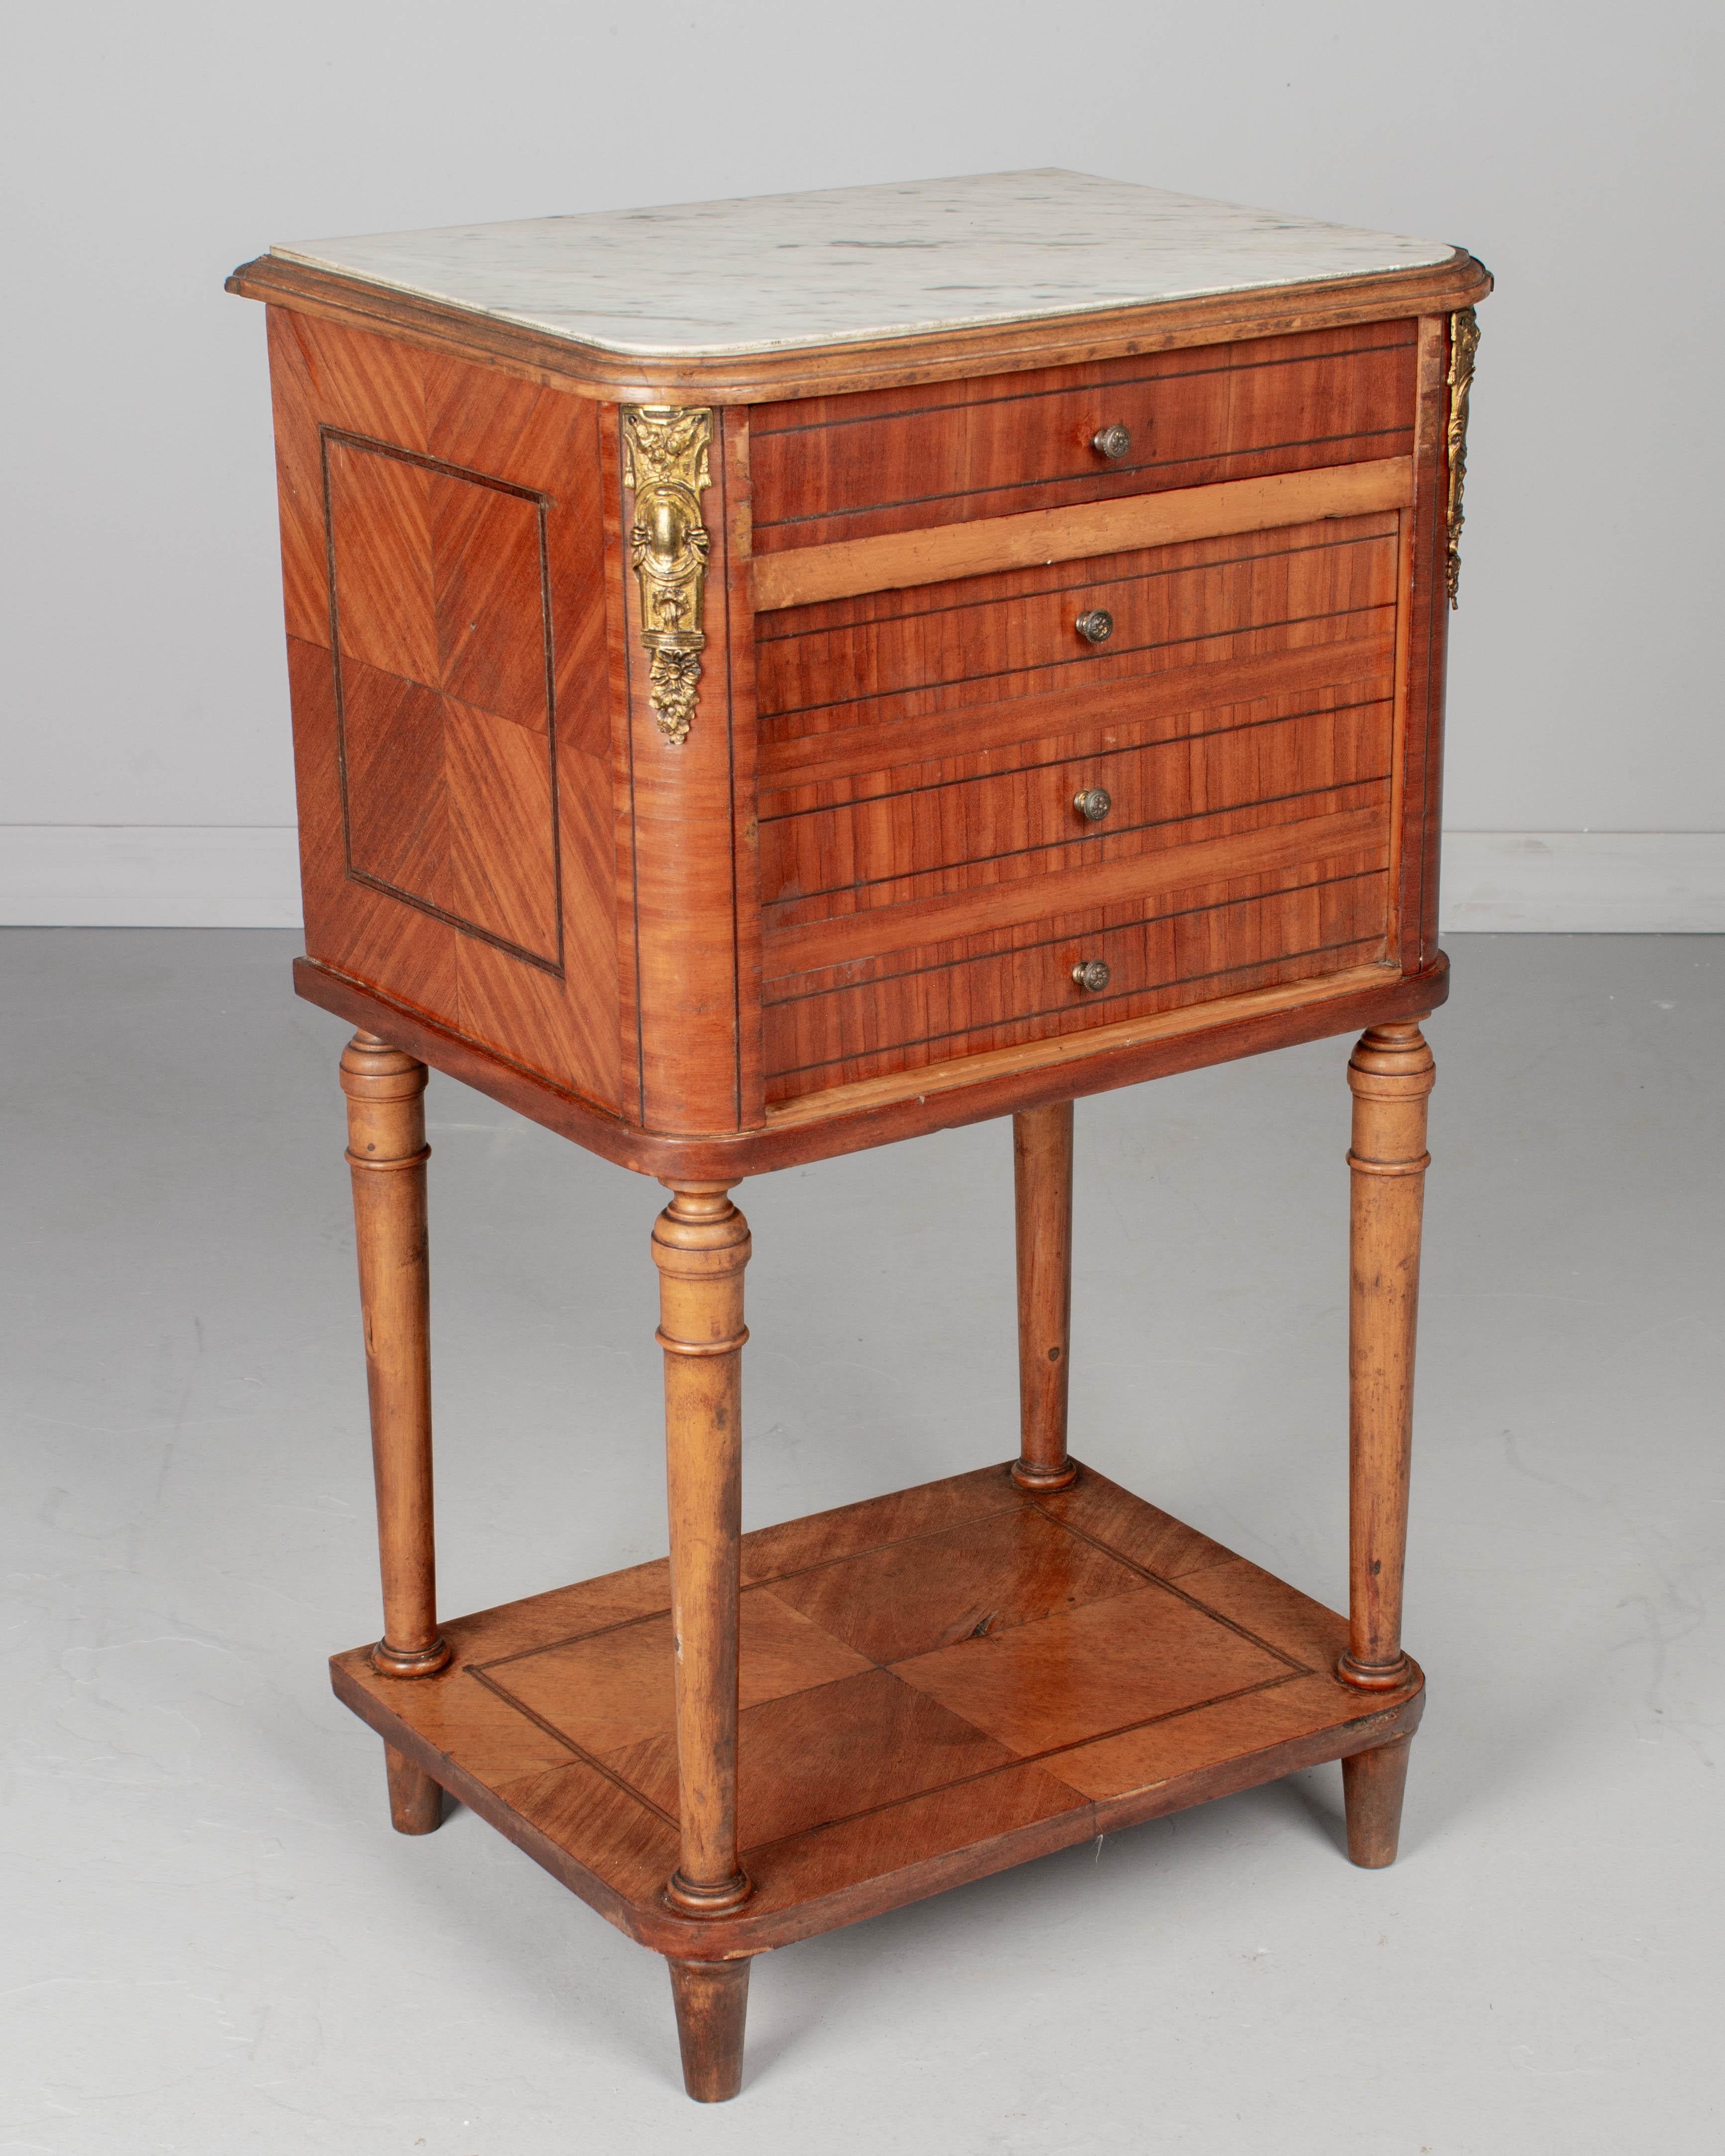 A Louis XVI style marble top marquetry nightstand, or side table, made of solid and veneer of mahogany with a small dovetailed drawer, turned tapered legs and lower shelf. Cabinet door with false drawer front opens to a marble lined interior.